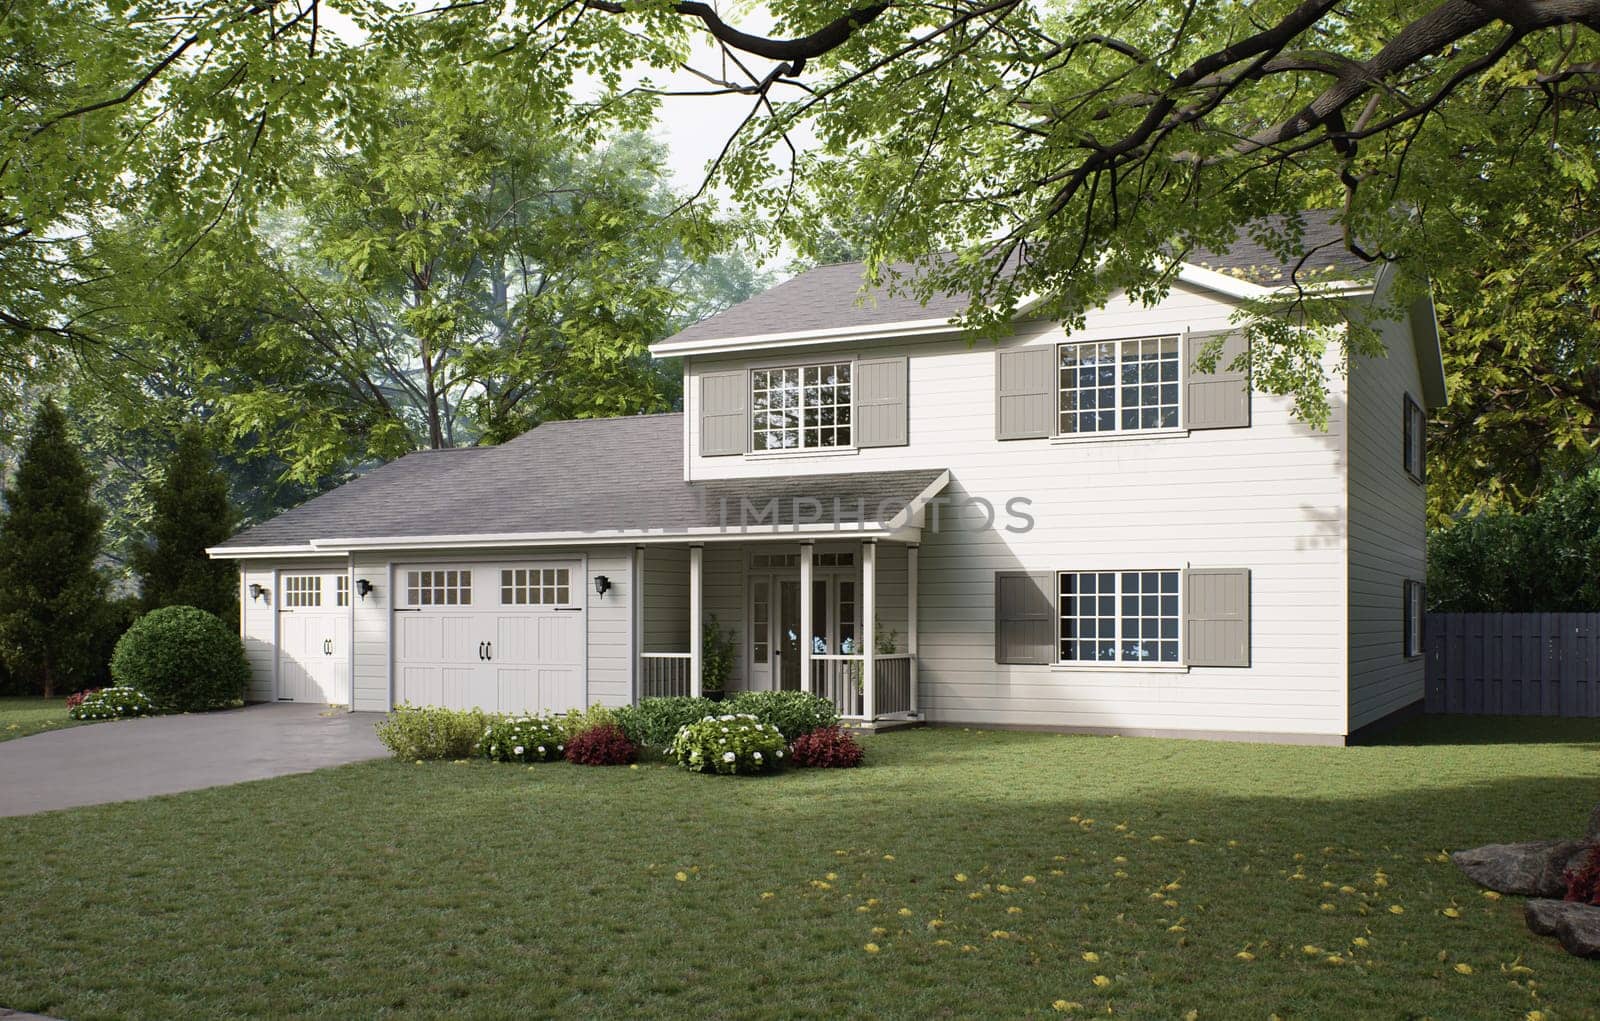 Traditional American home with two garages, a driveway and a large tree. by N_Design